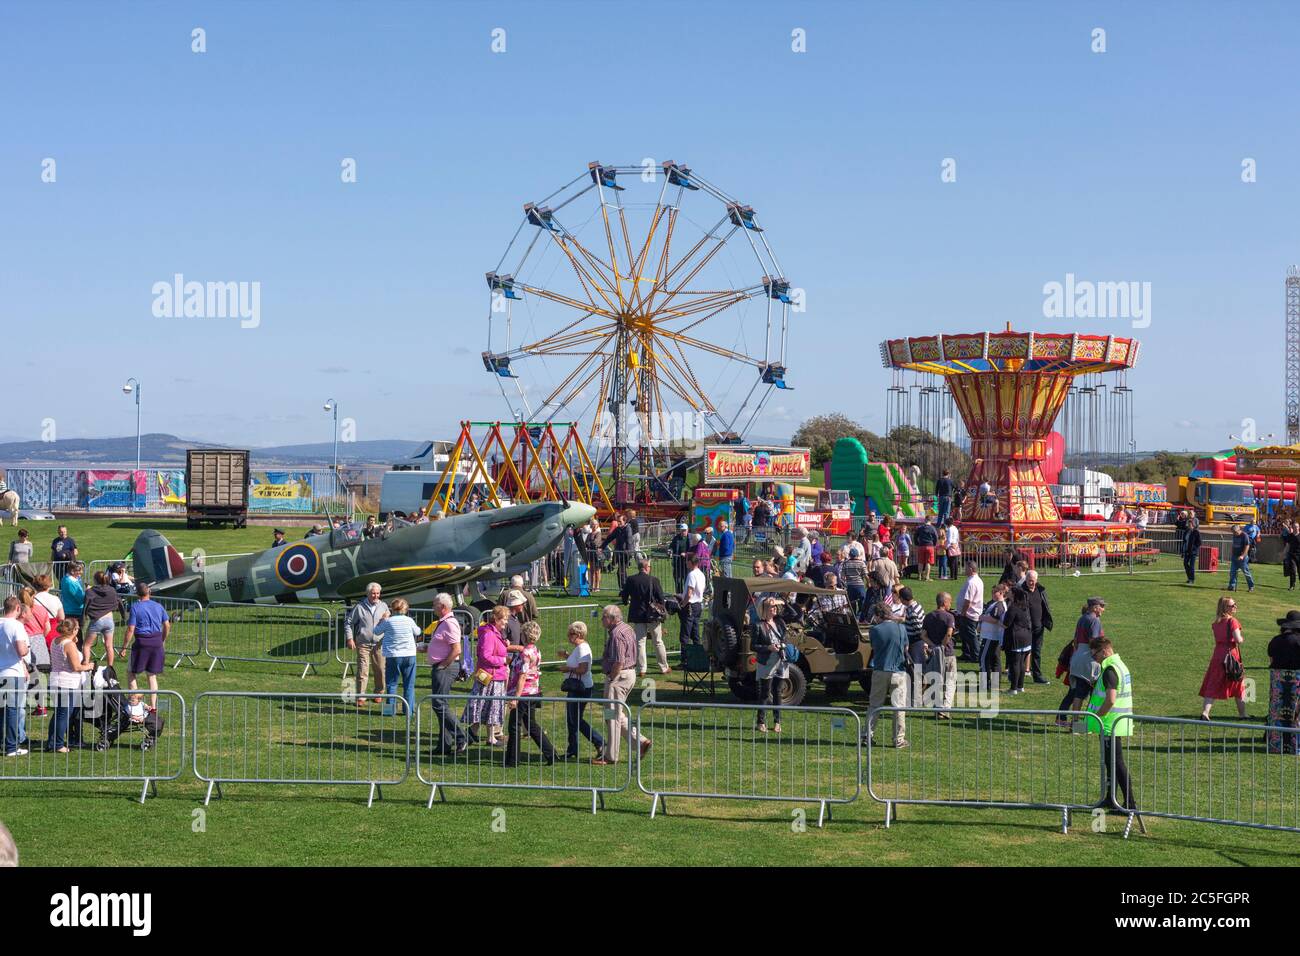 06/09/2015 Morecambe vintage festival with replica spitfire on display Stock Photo